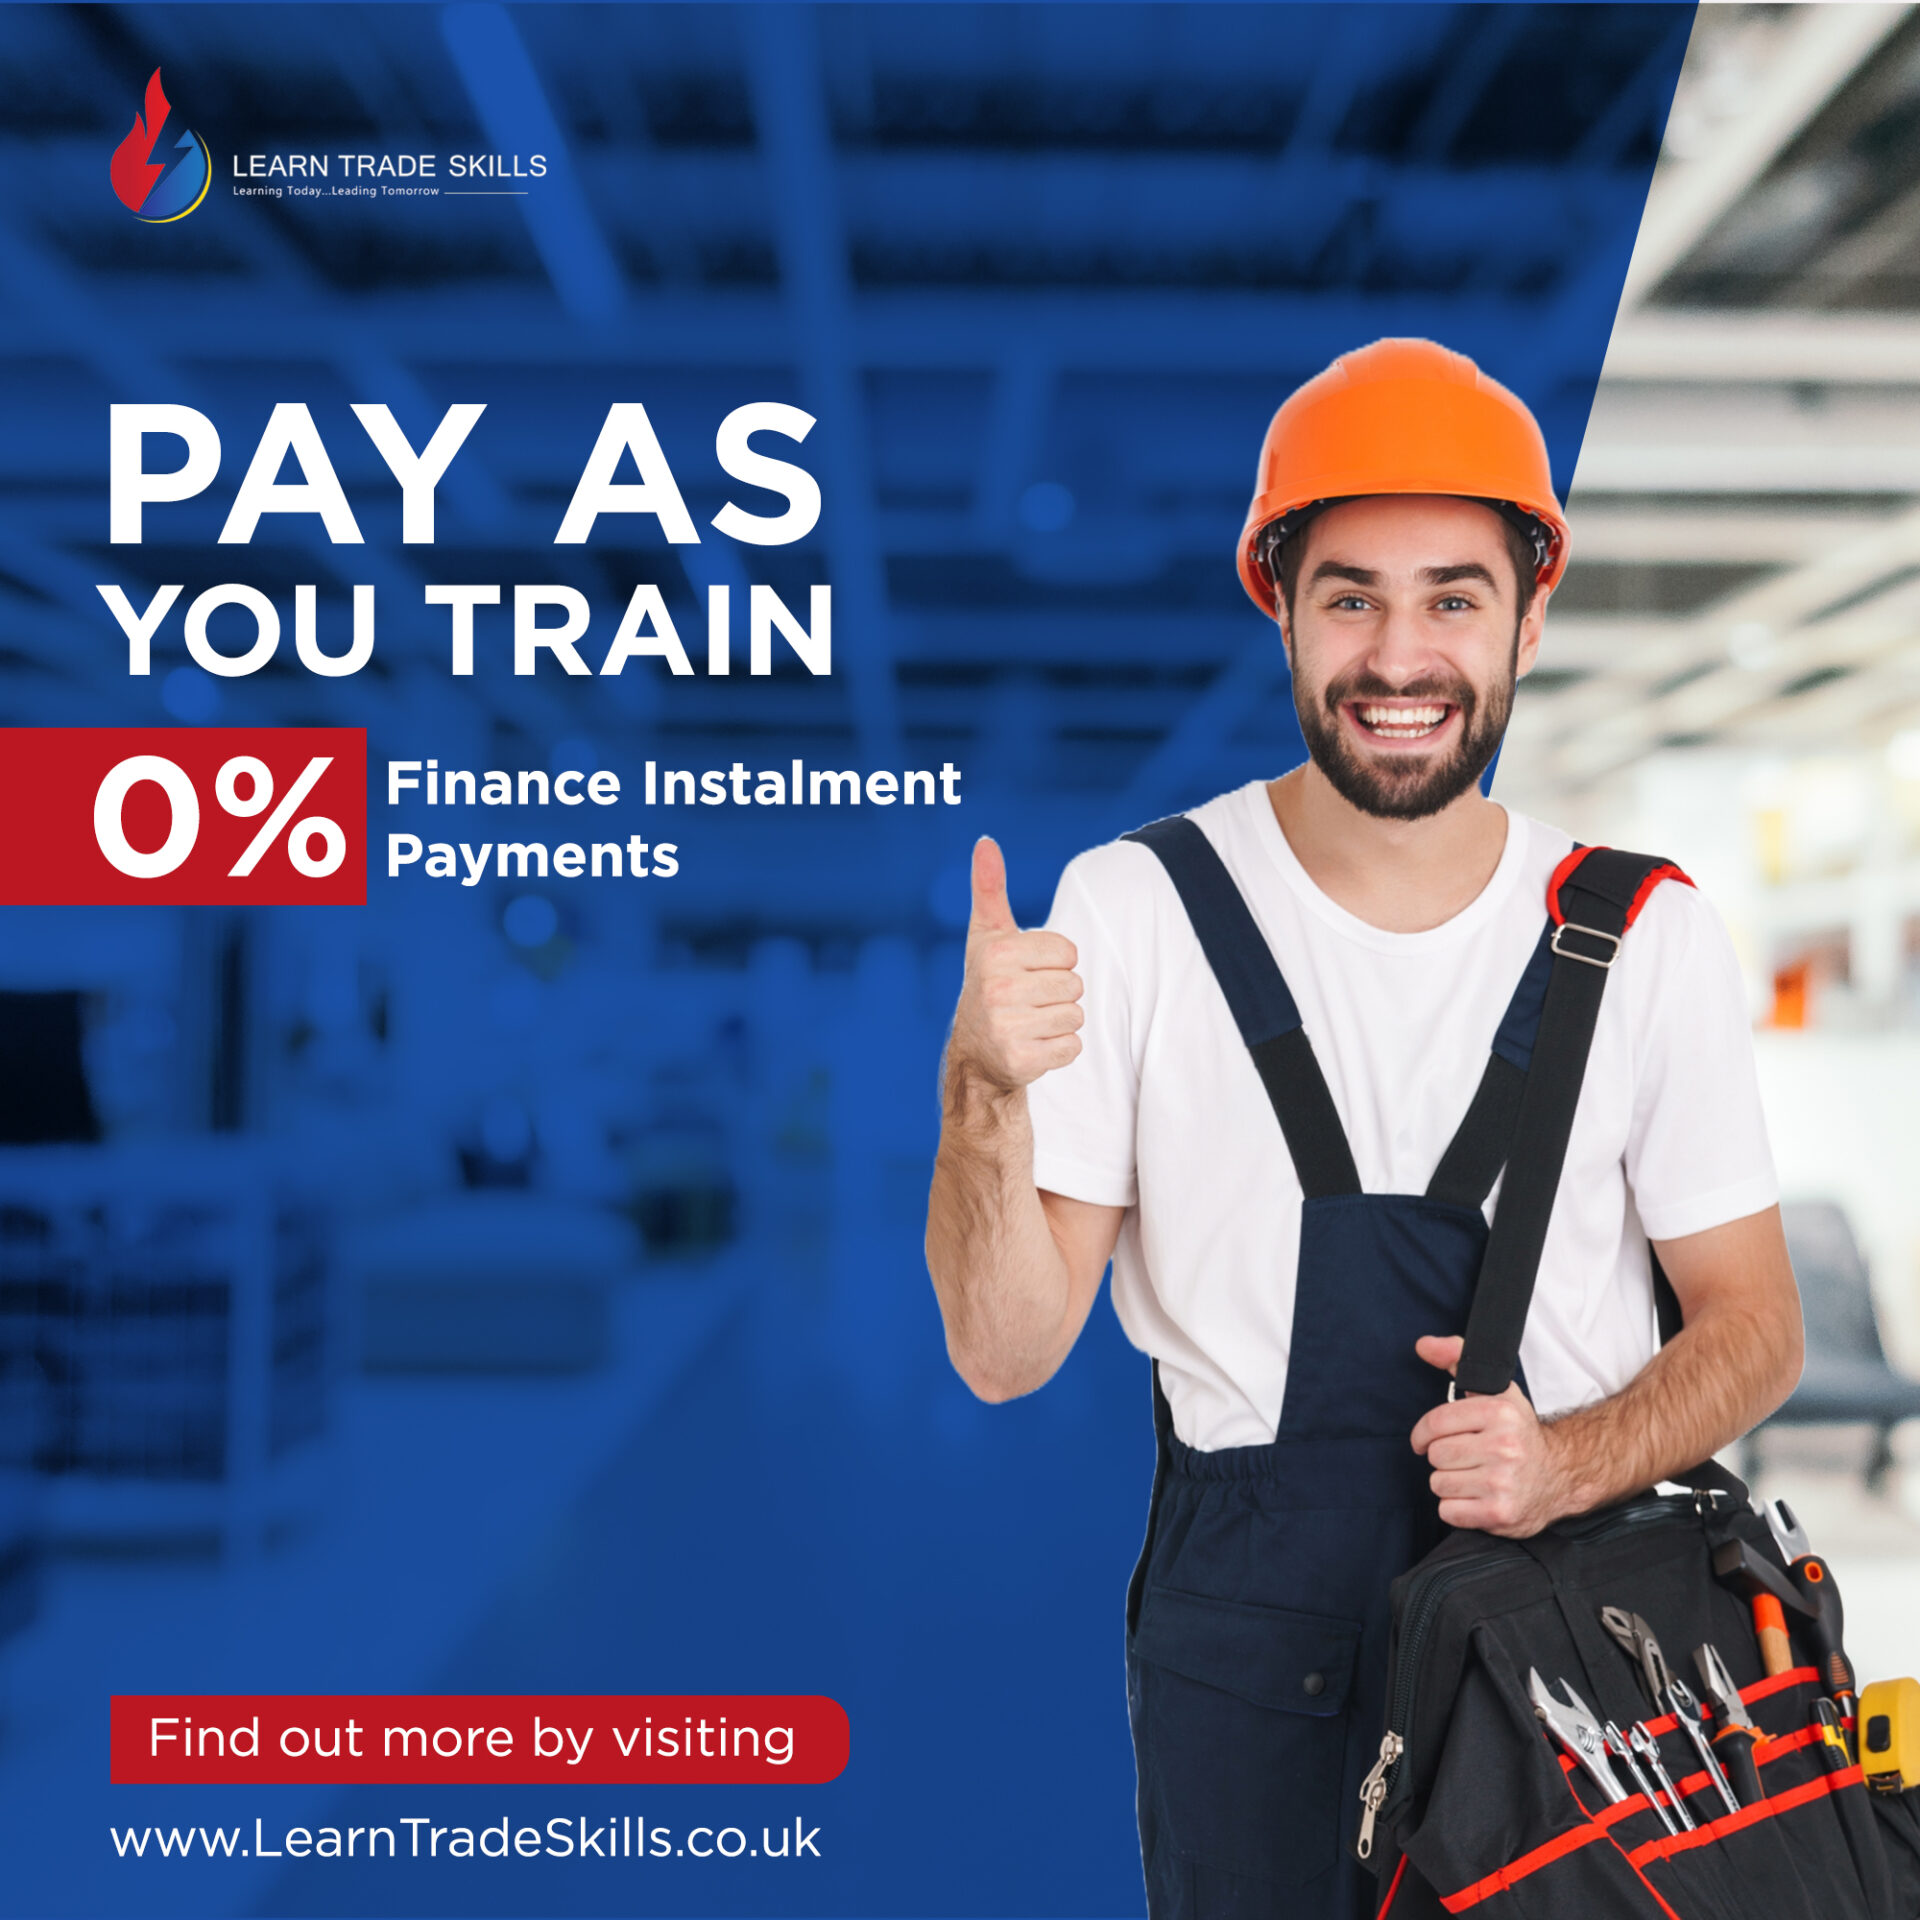 Pay as you train 0% interest electrical training instalments